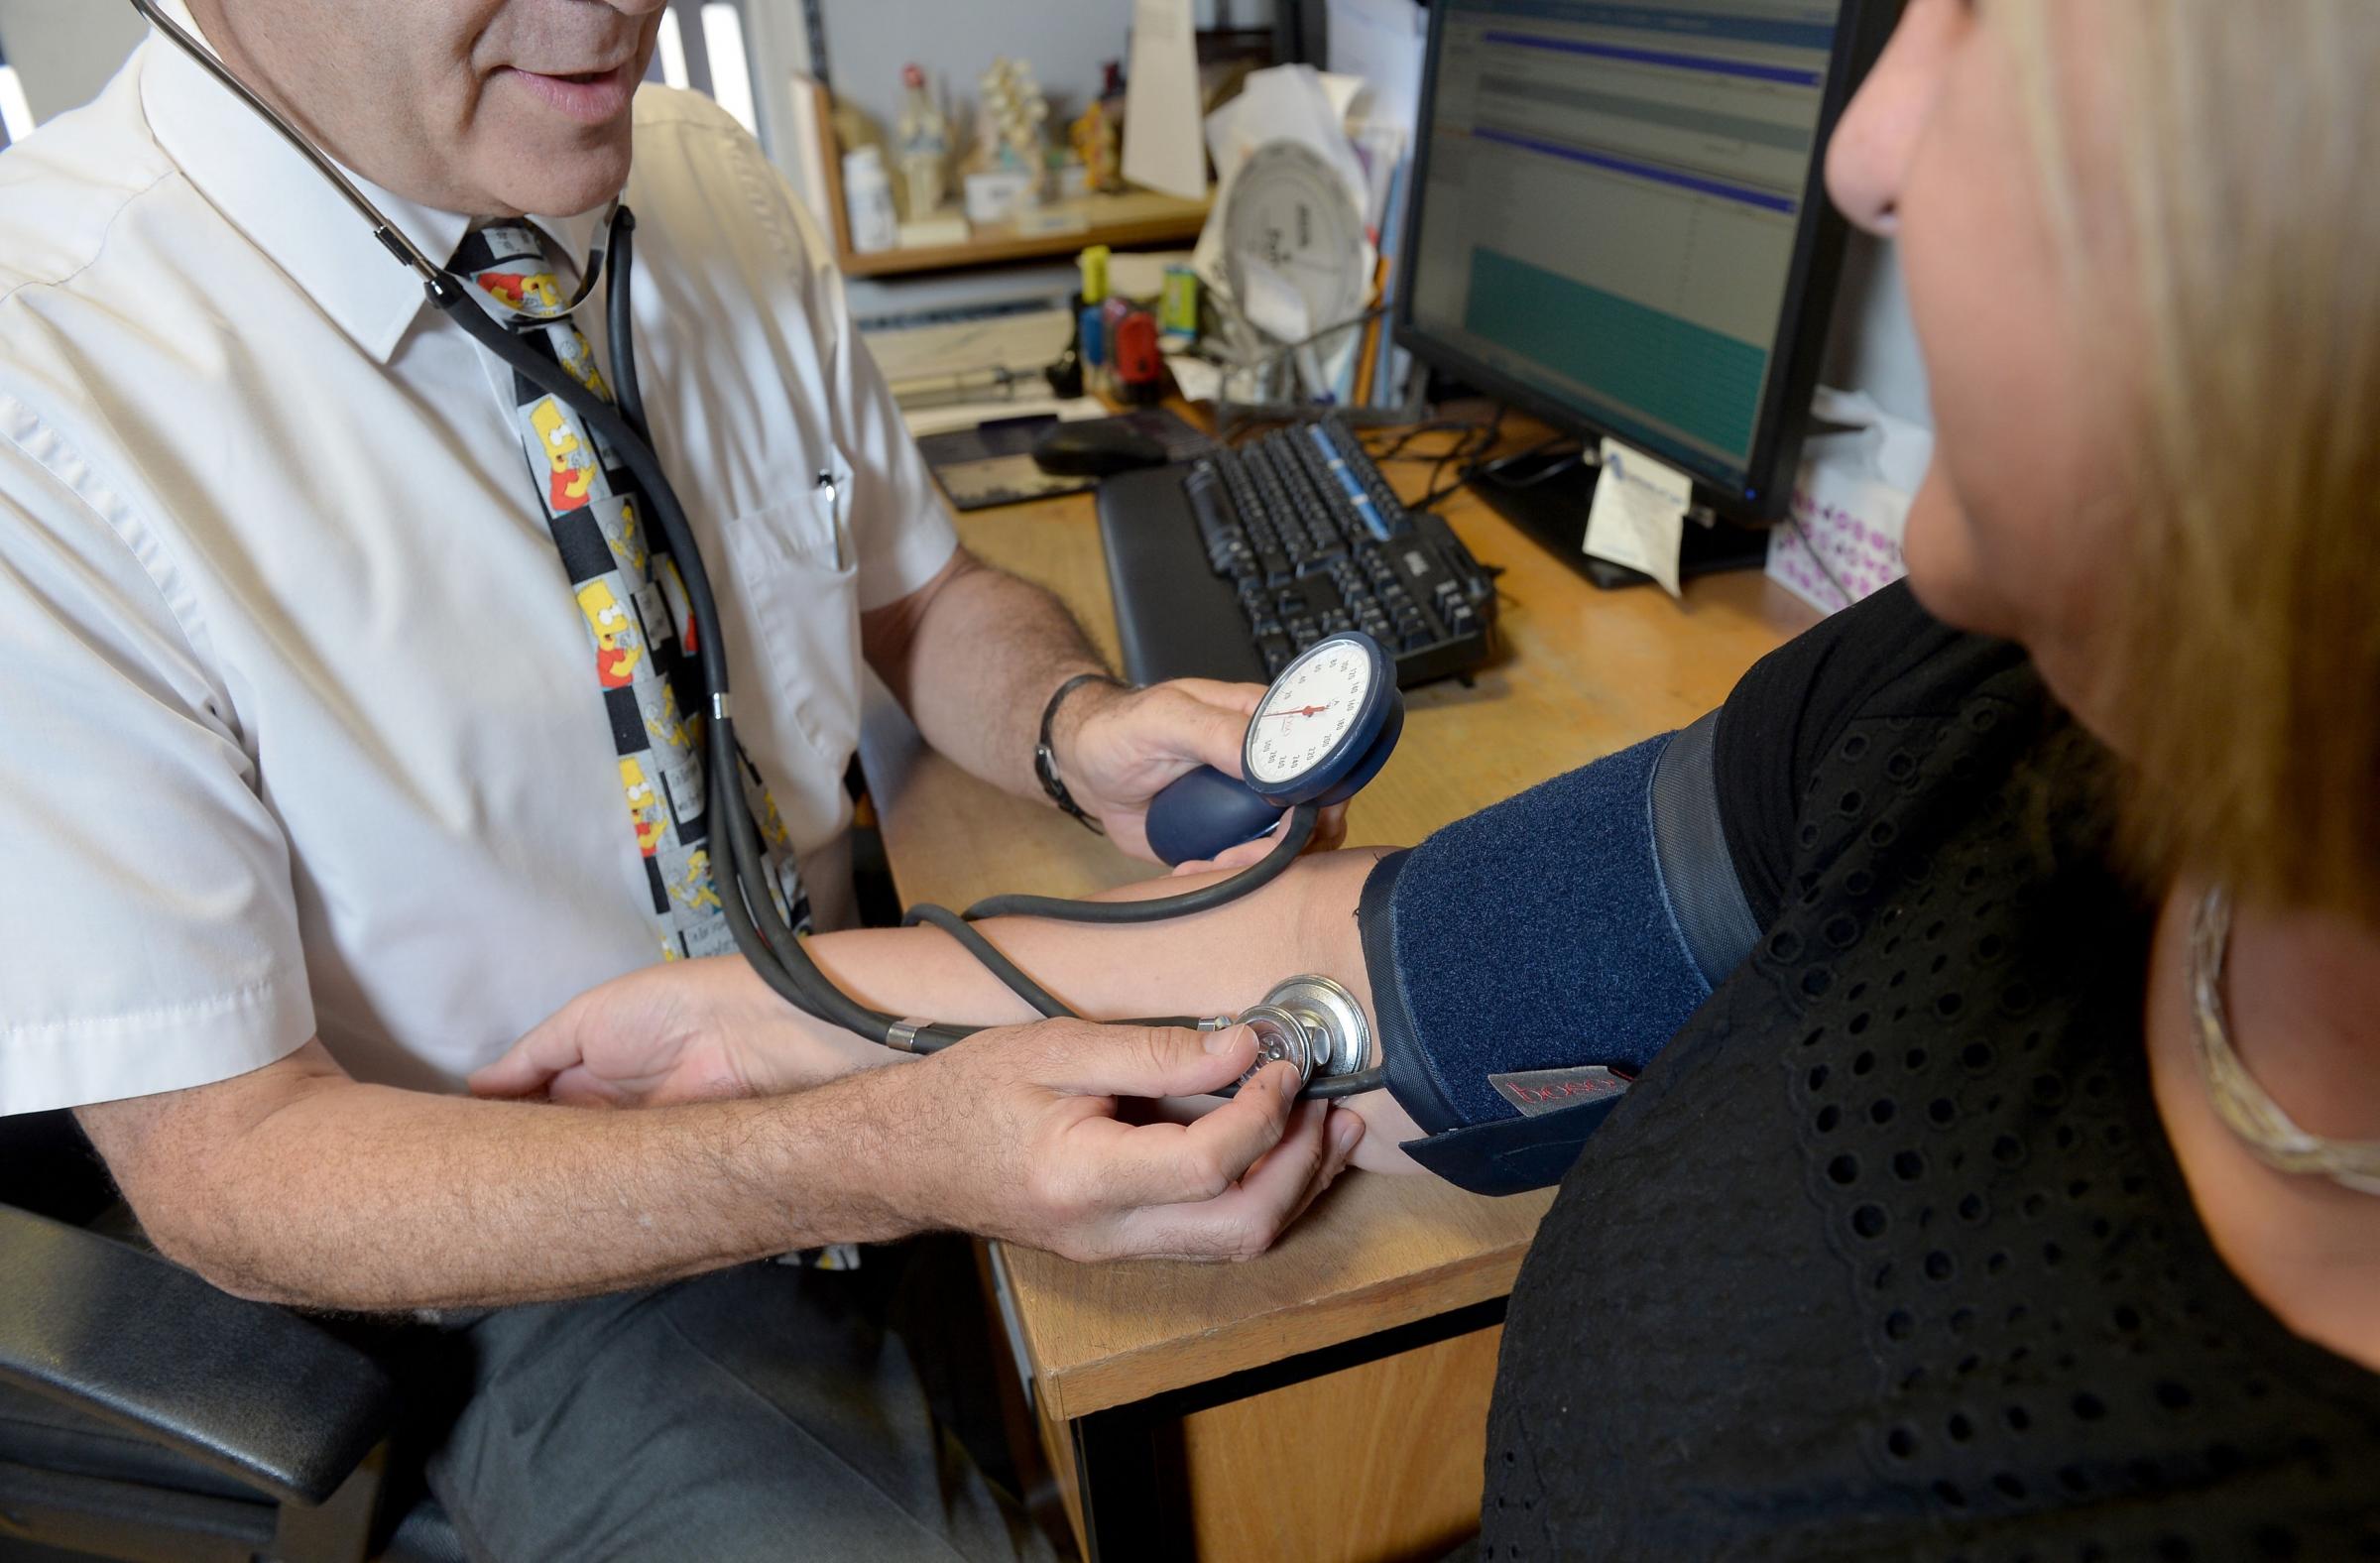 GPs are working hard to provide a good service despite being grossly overstretched